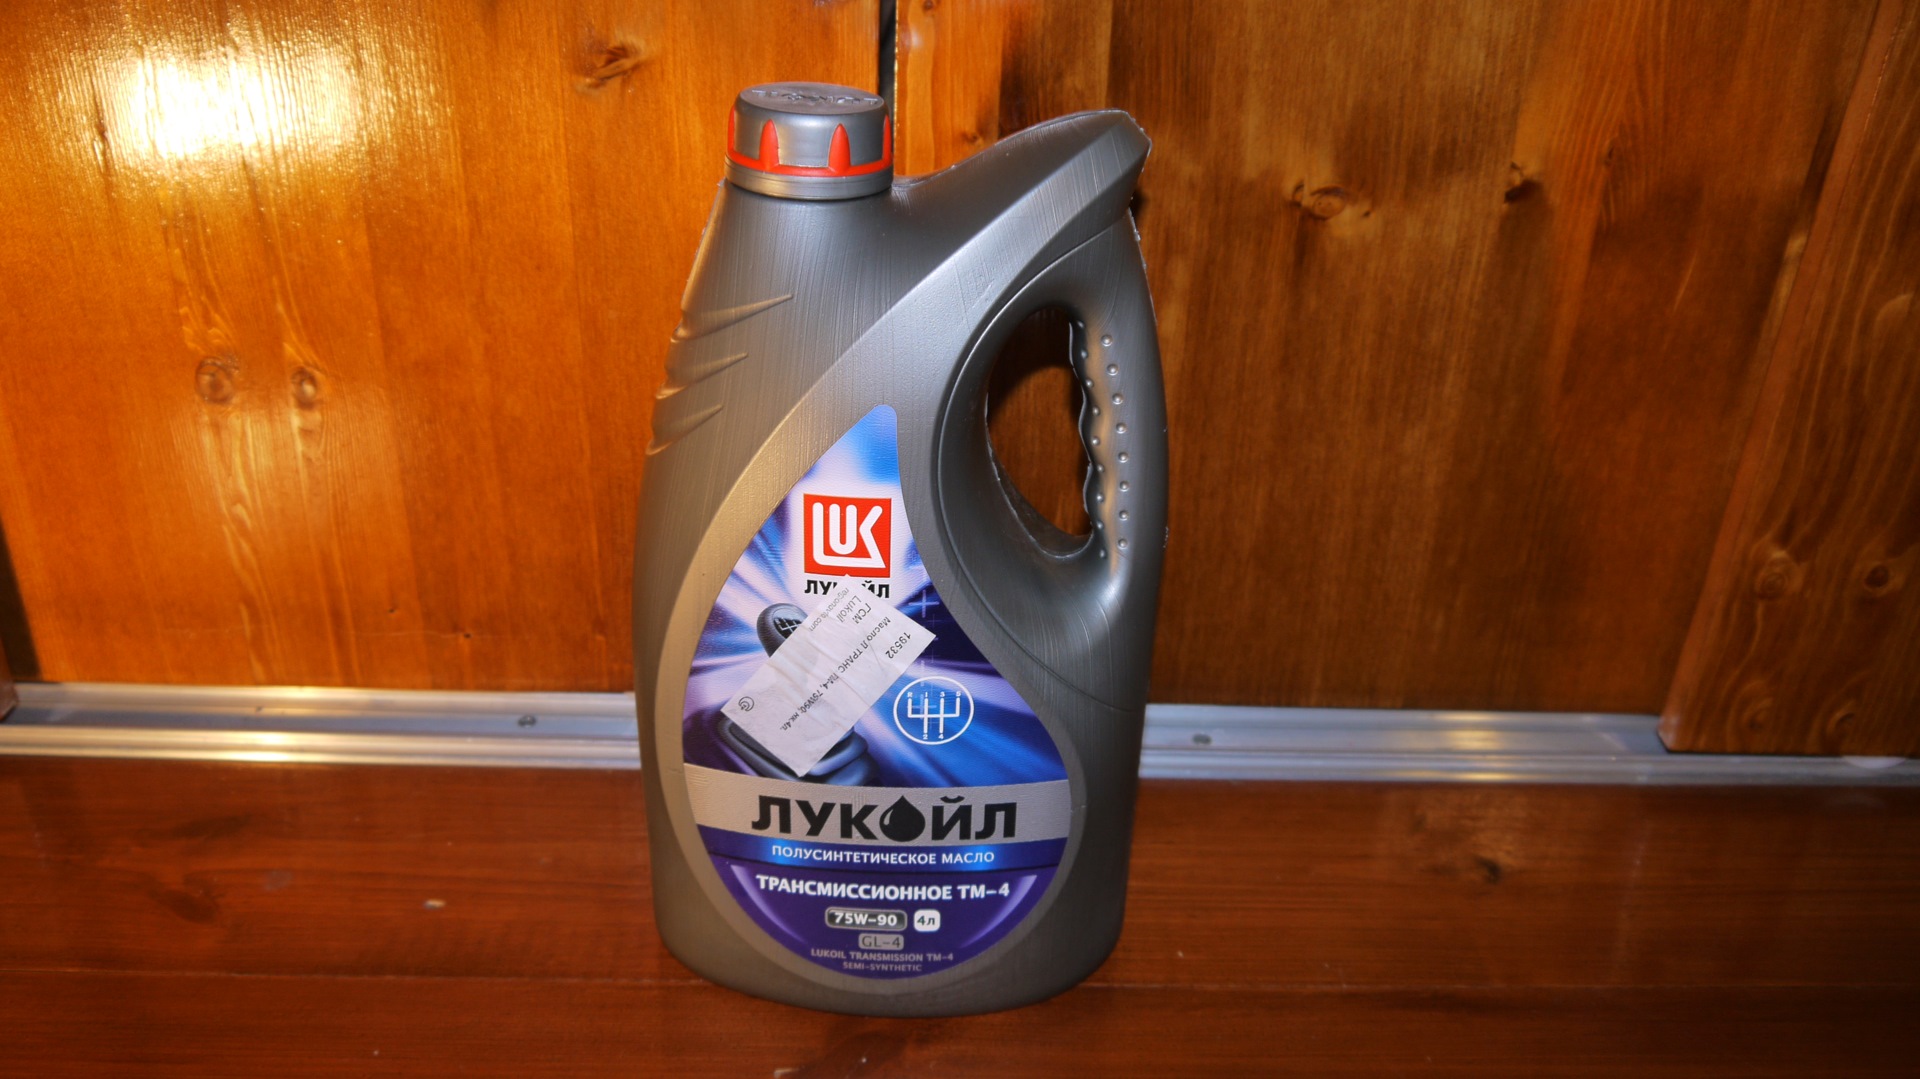 Масло api gl 4 75w90. Масло Лукойл 75w90. Лукойл ТМ-4 75w-90 фф3. Лукойл ТМ 4. Lukoil 75w90 20л.